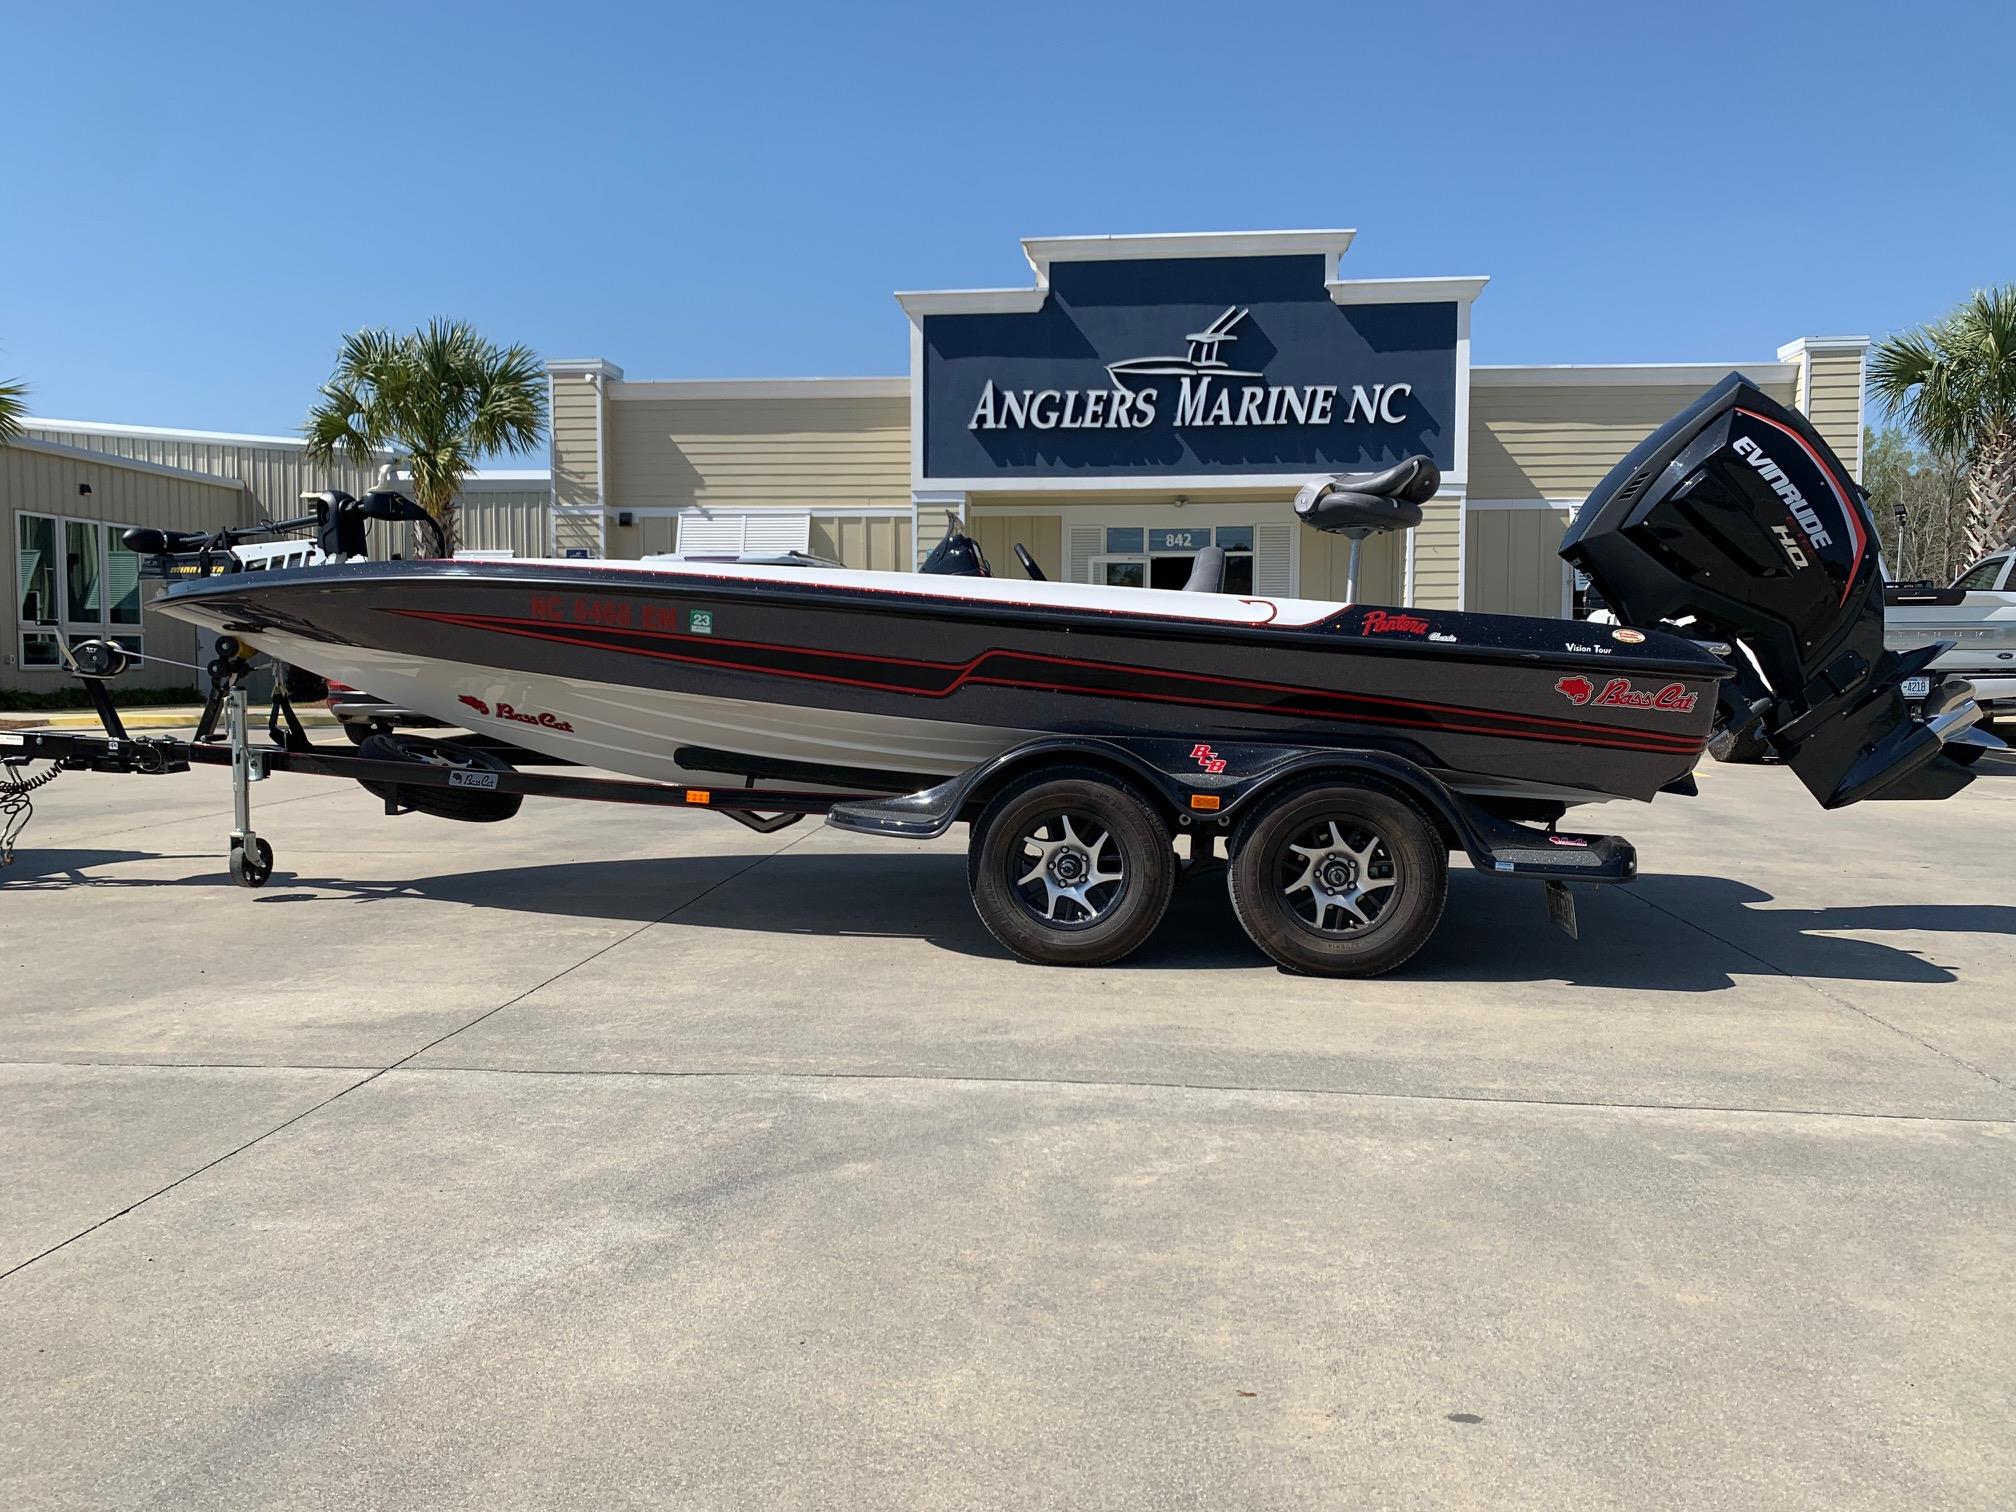 2018 Bass Cat Pantera Classic For Sale In Nc Anglers Marine 910